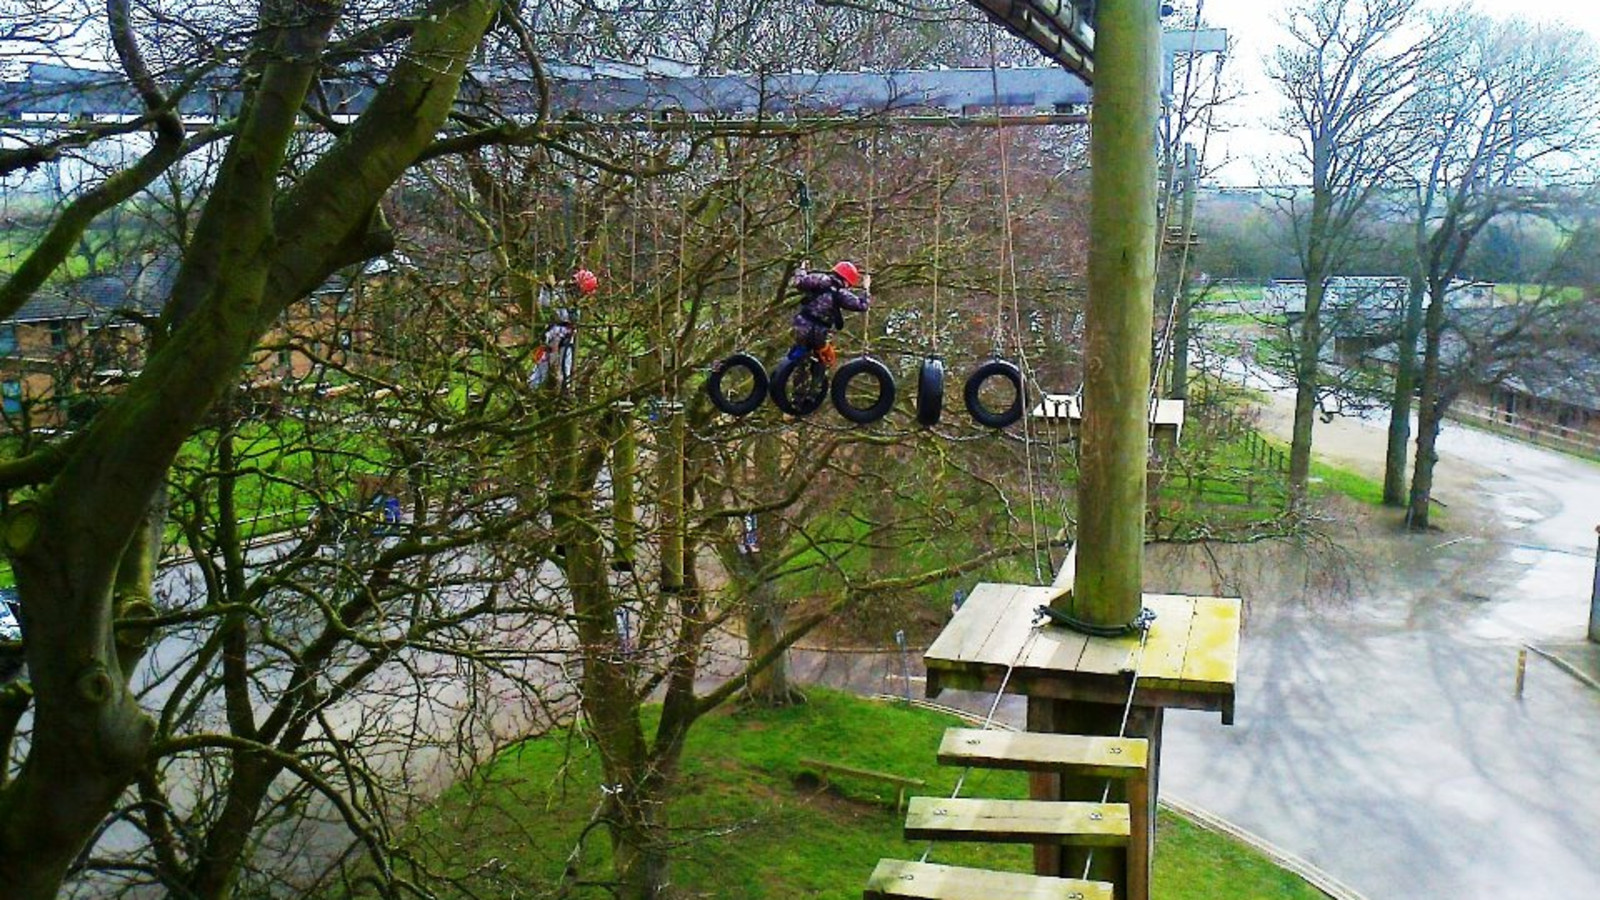 High ropes challenge